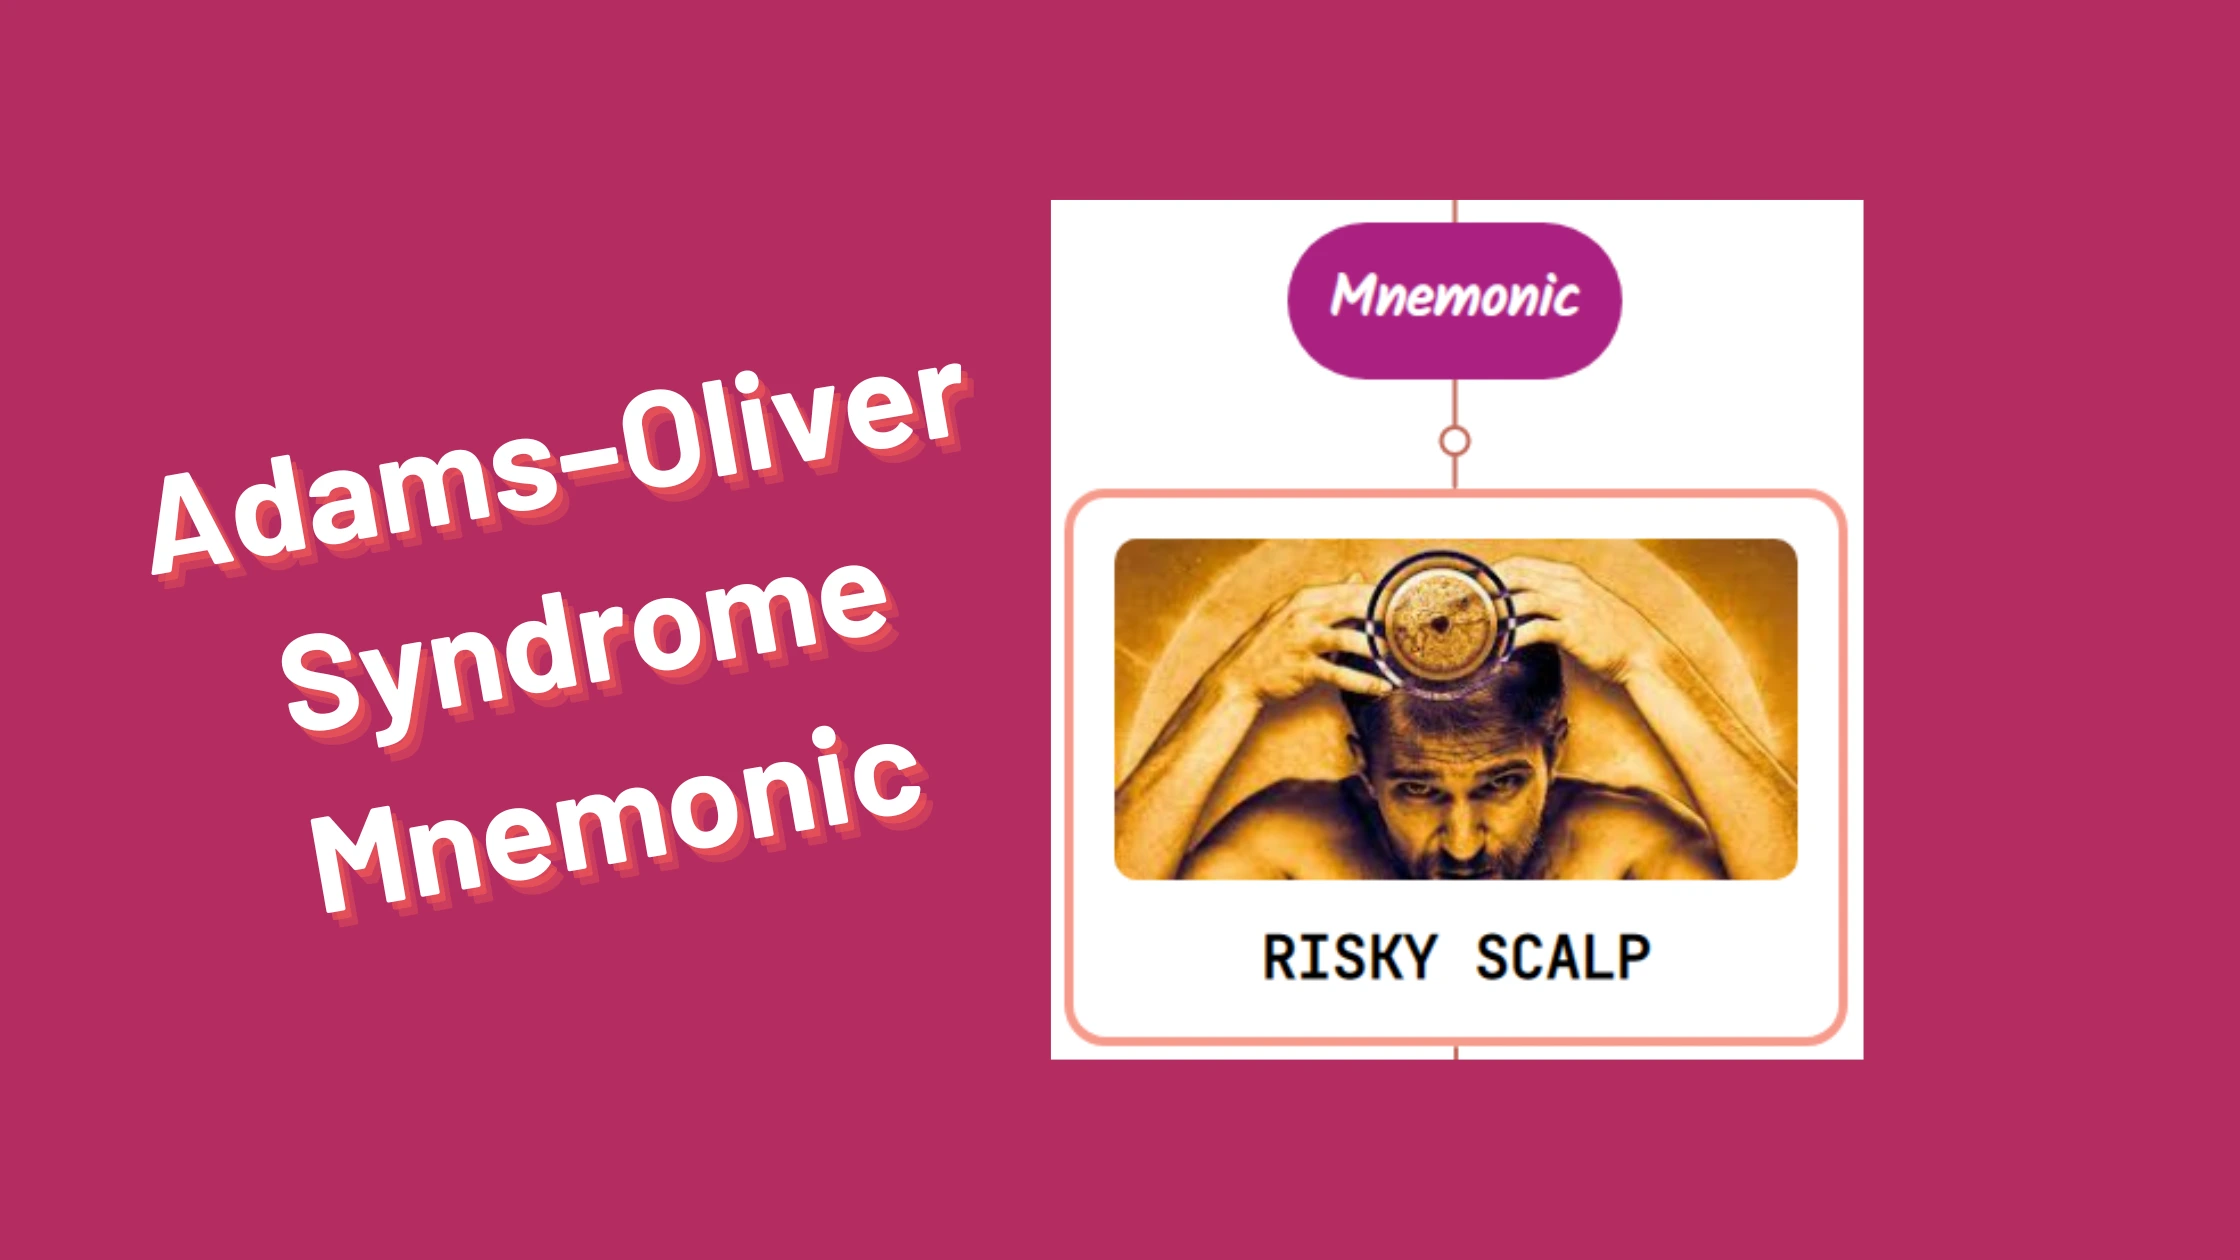 You are currently viewing Adams–Oliver Syndrome Mnemonics [NEVER FORGET]